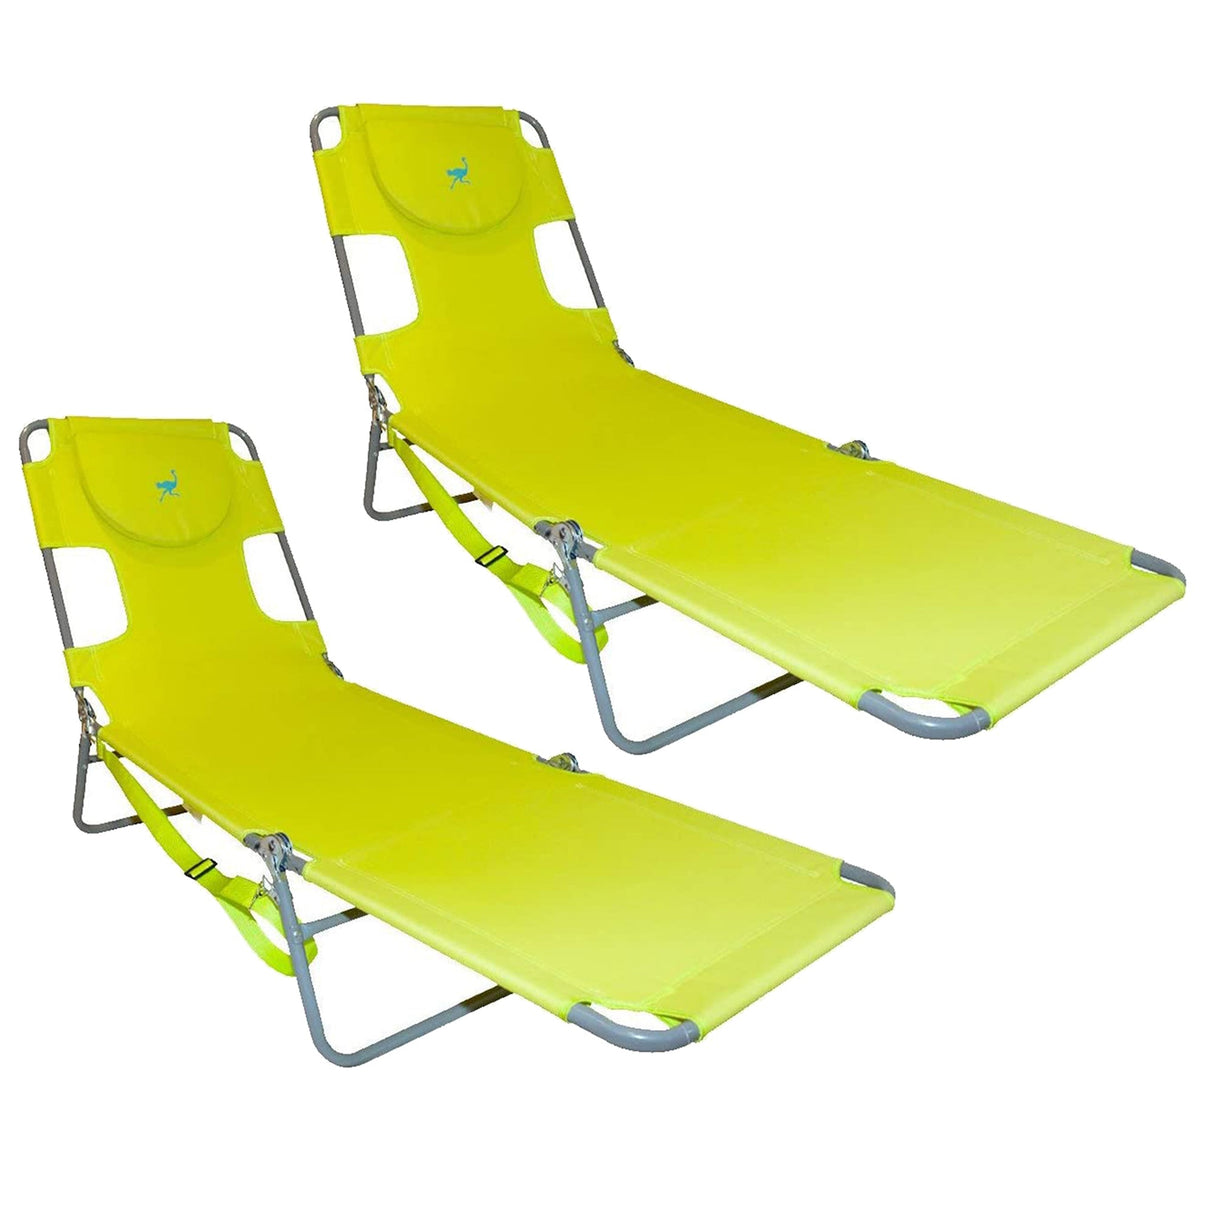 Ostrich Chaise Lounge Foldable Sunbathing Beach Lawn Chair, Neon Green (2 Pack)